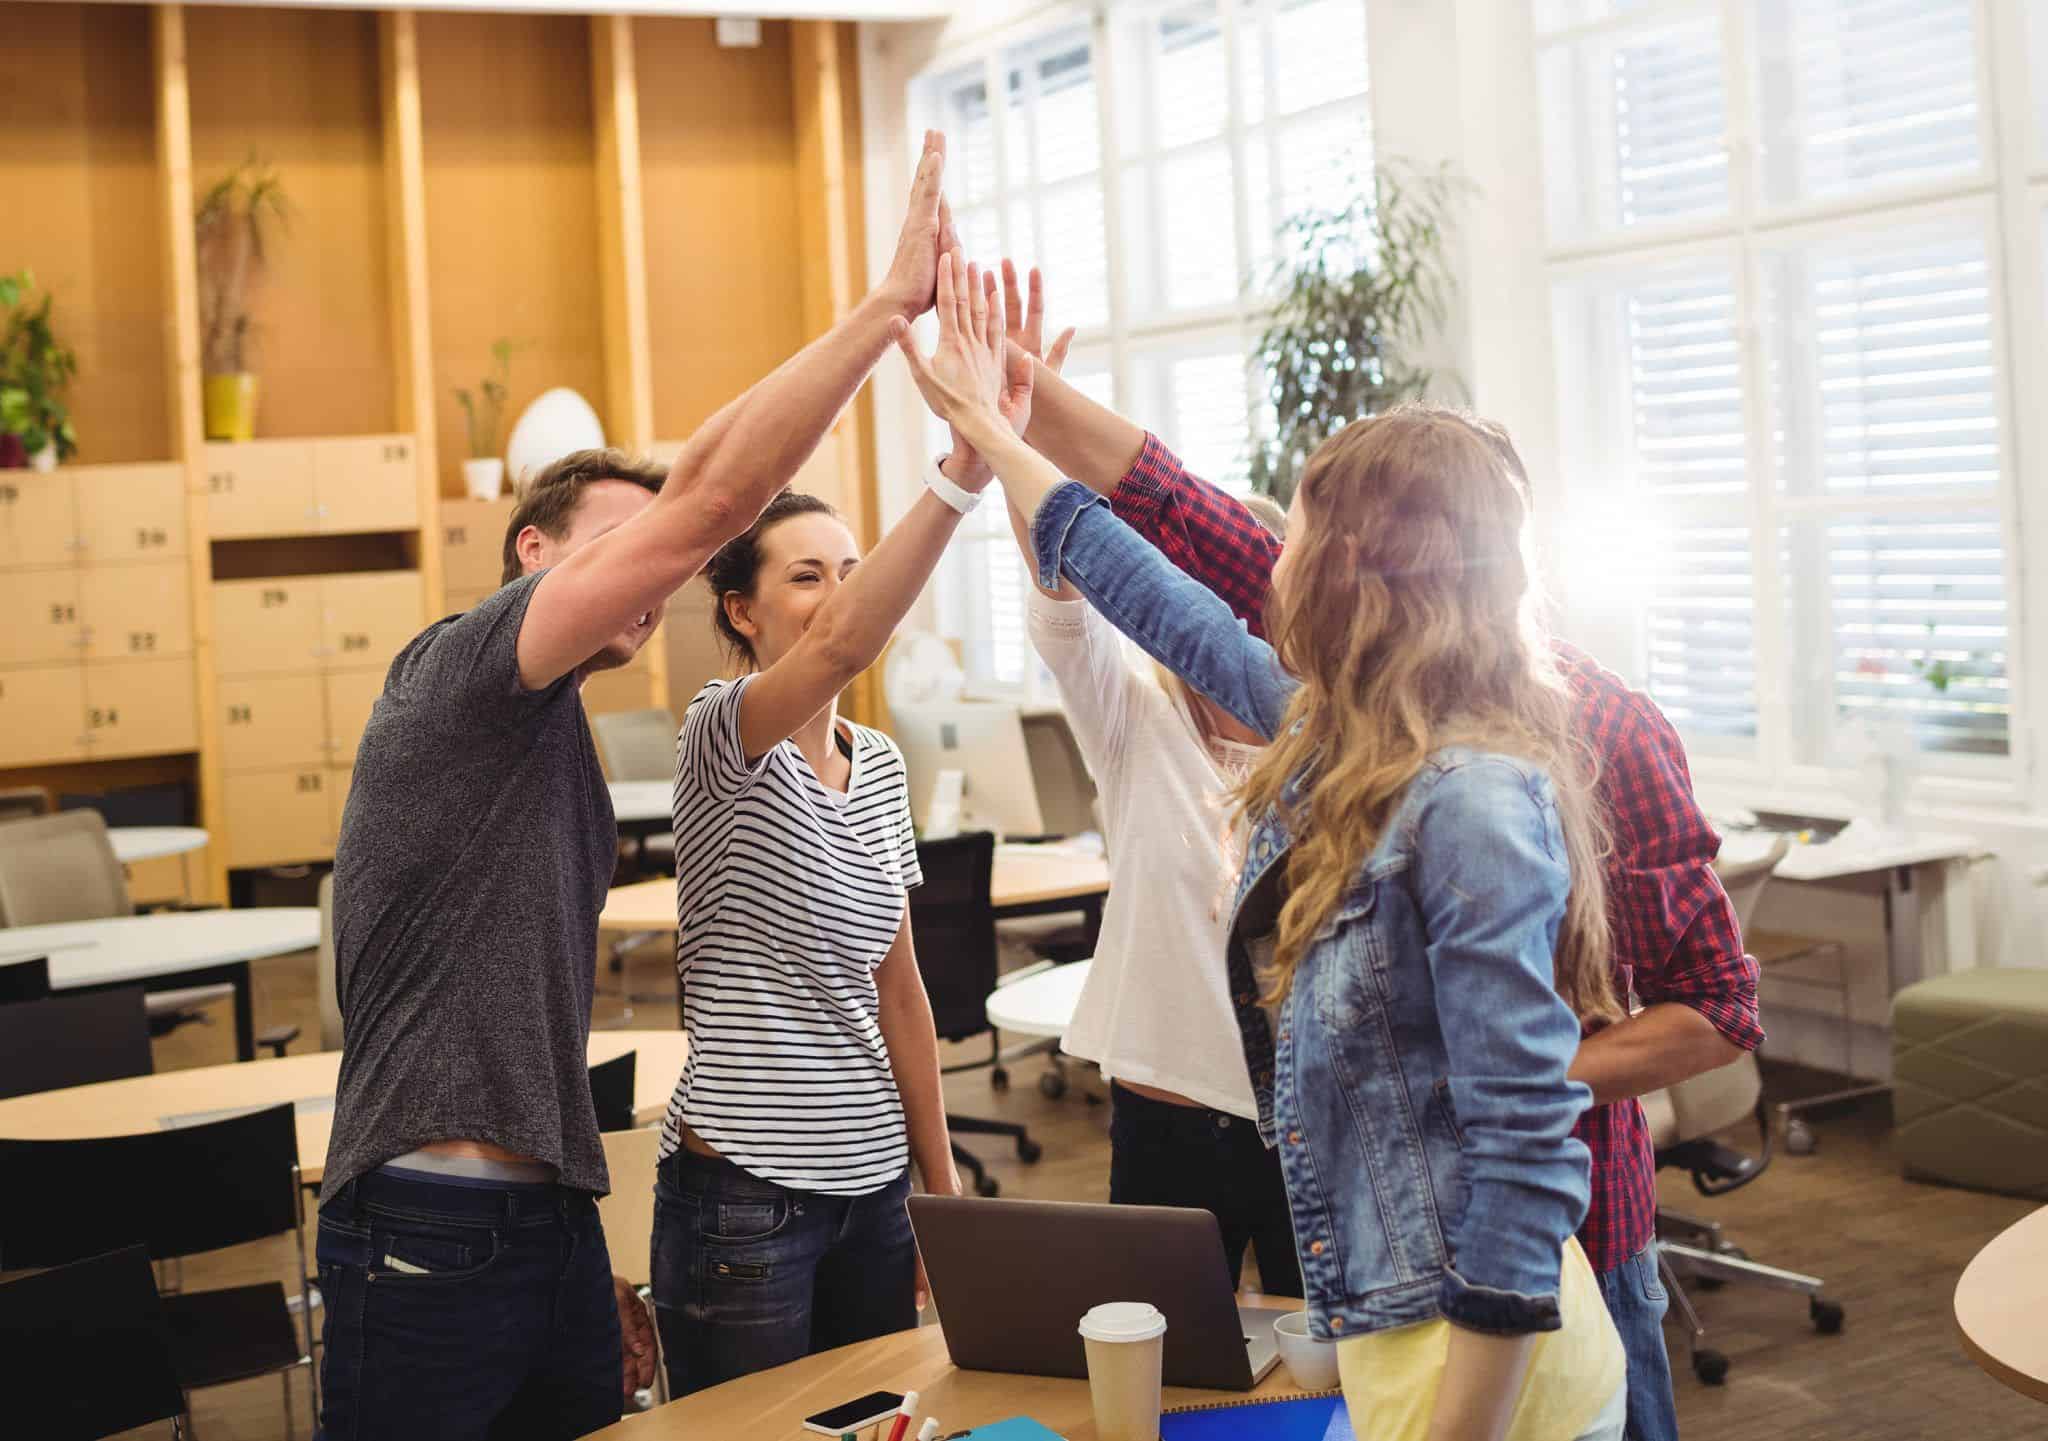 5 Tips for Welcoming Employees Back to the Office